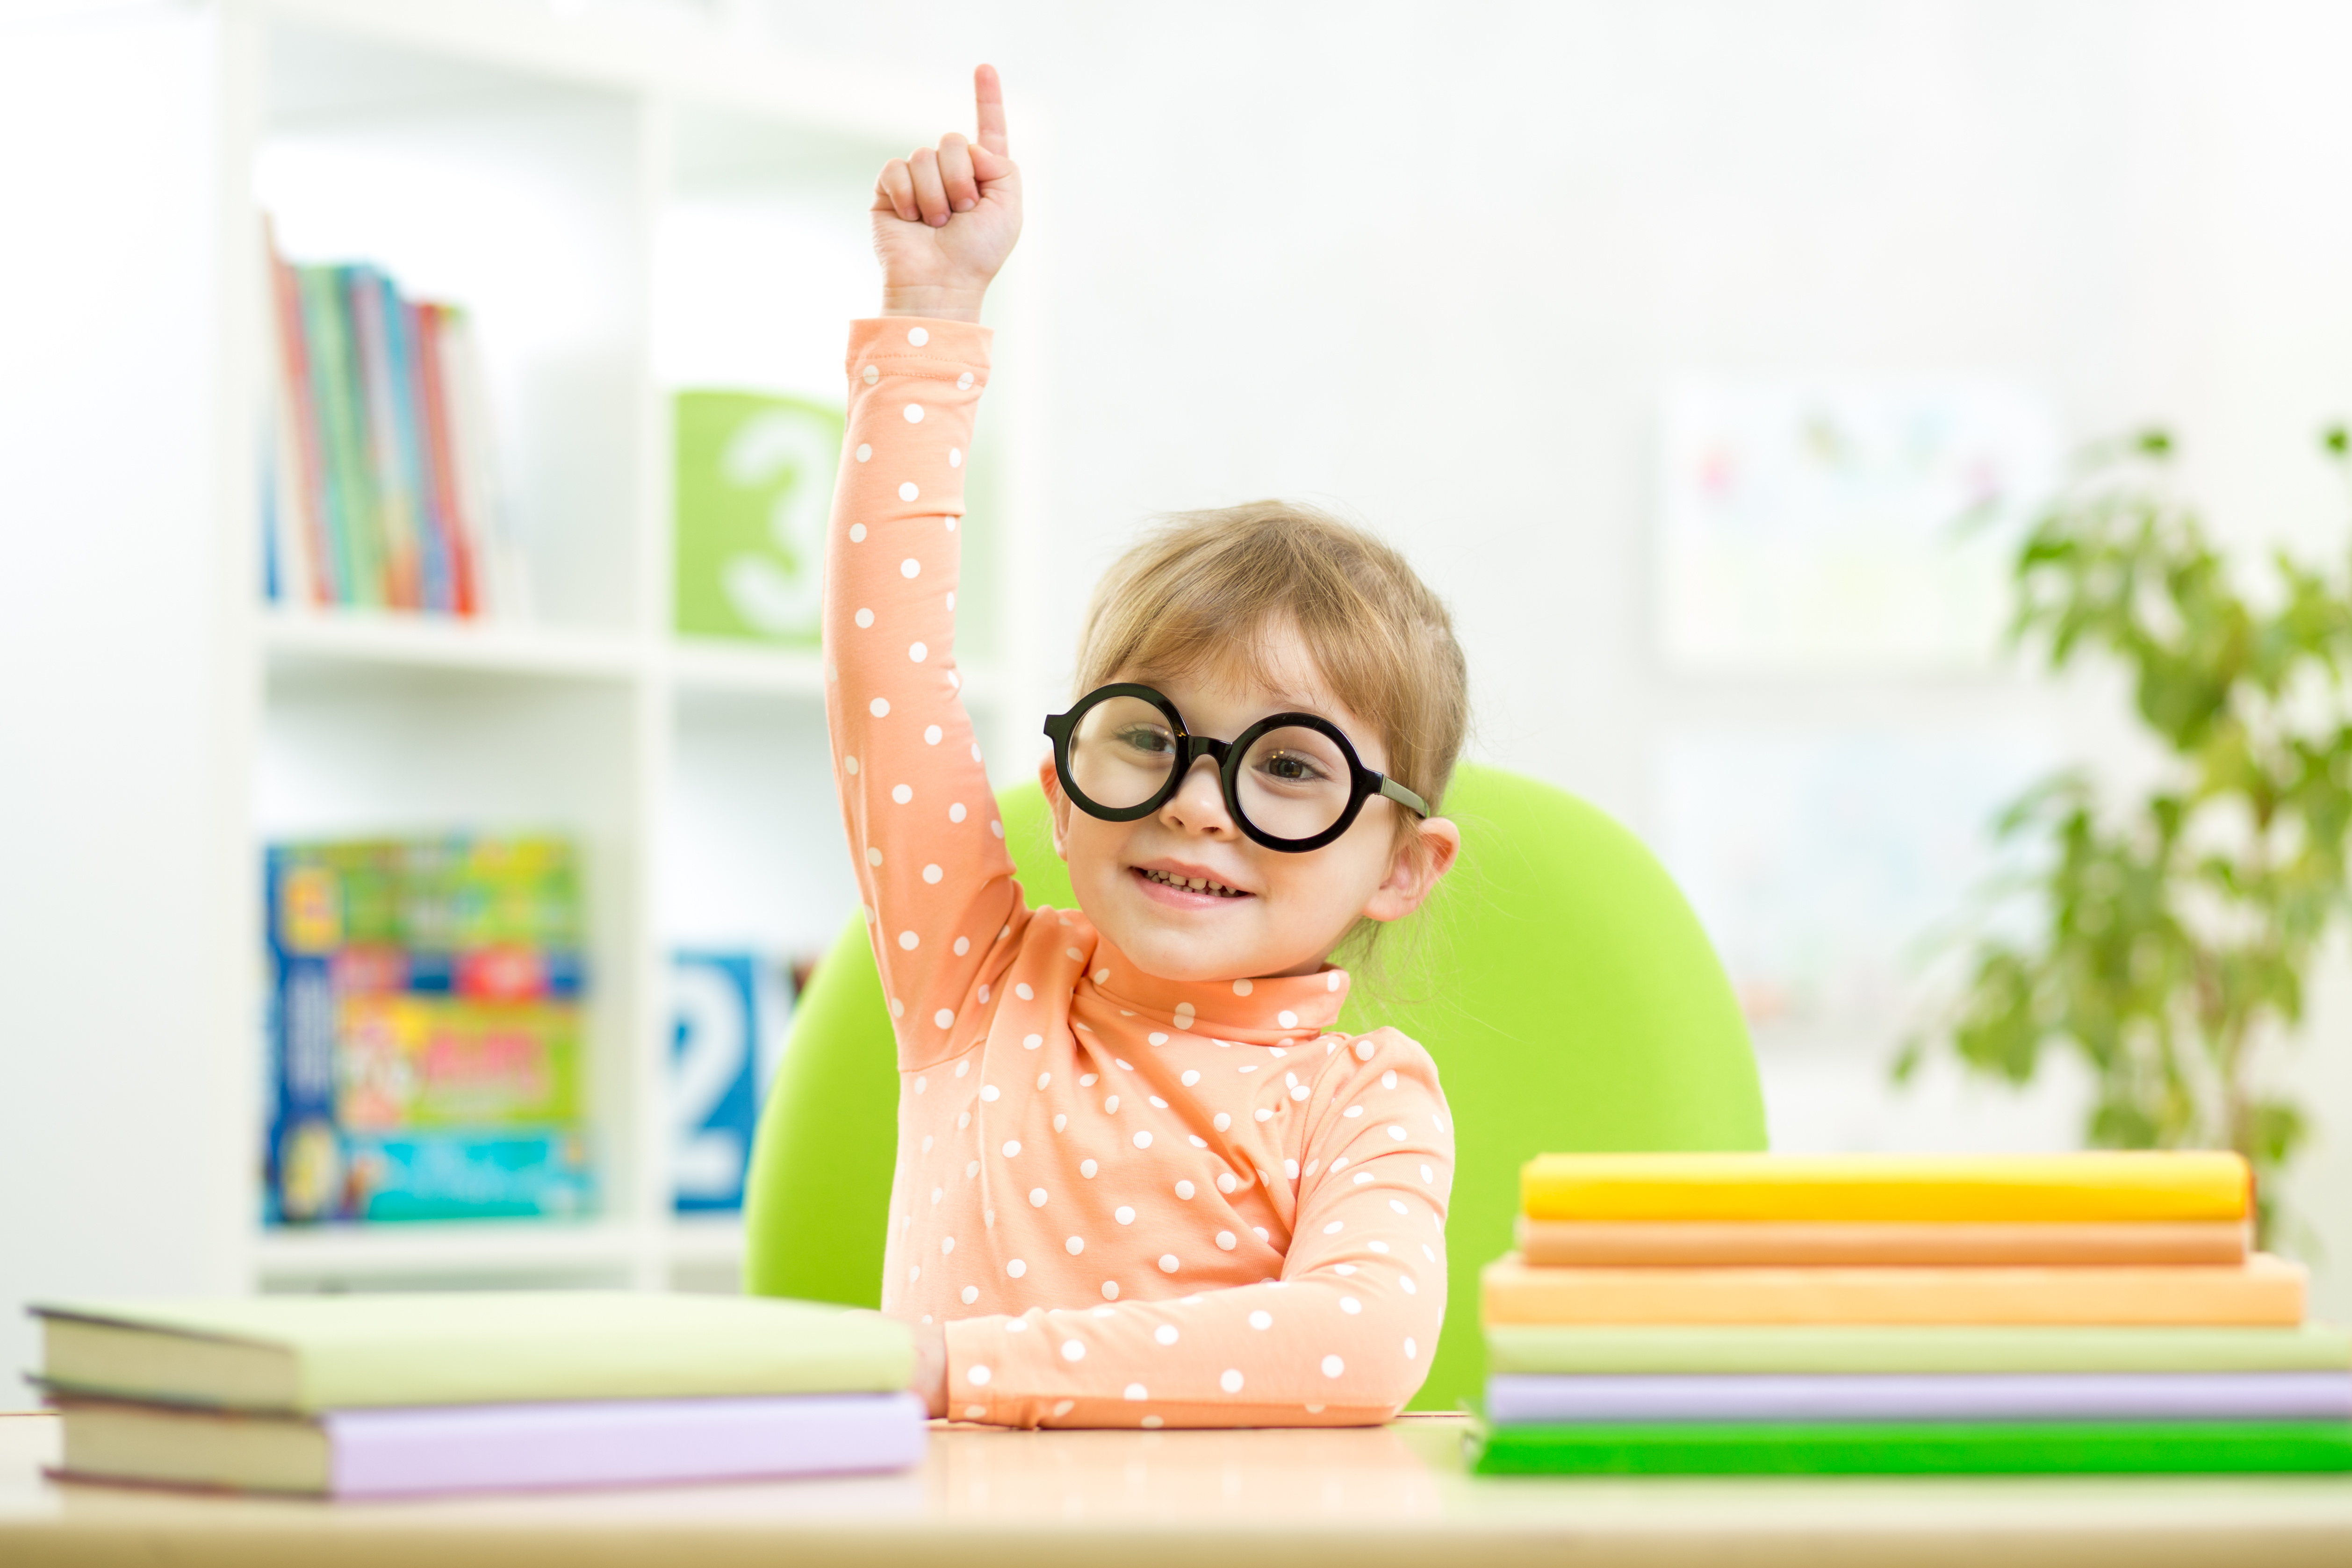 Little girl with glasses raising her hand in class